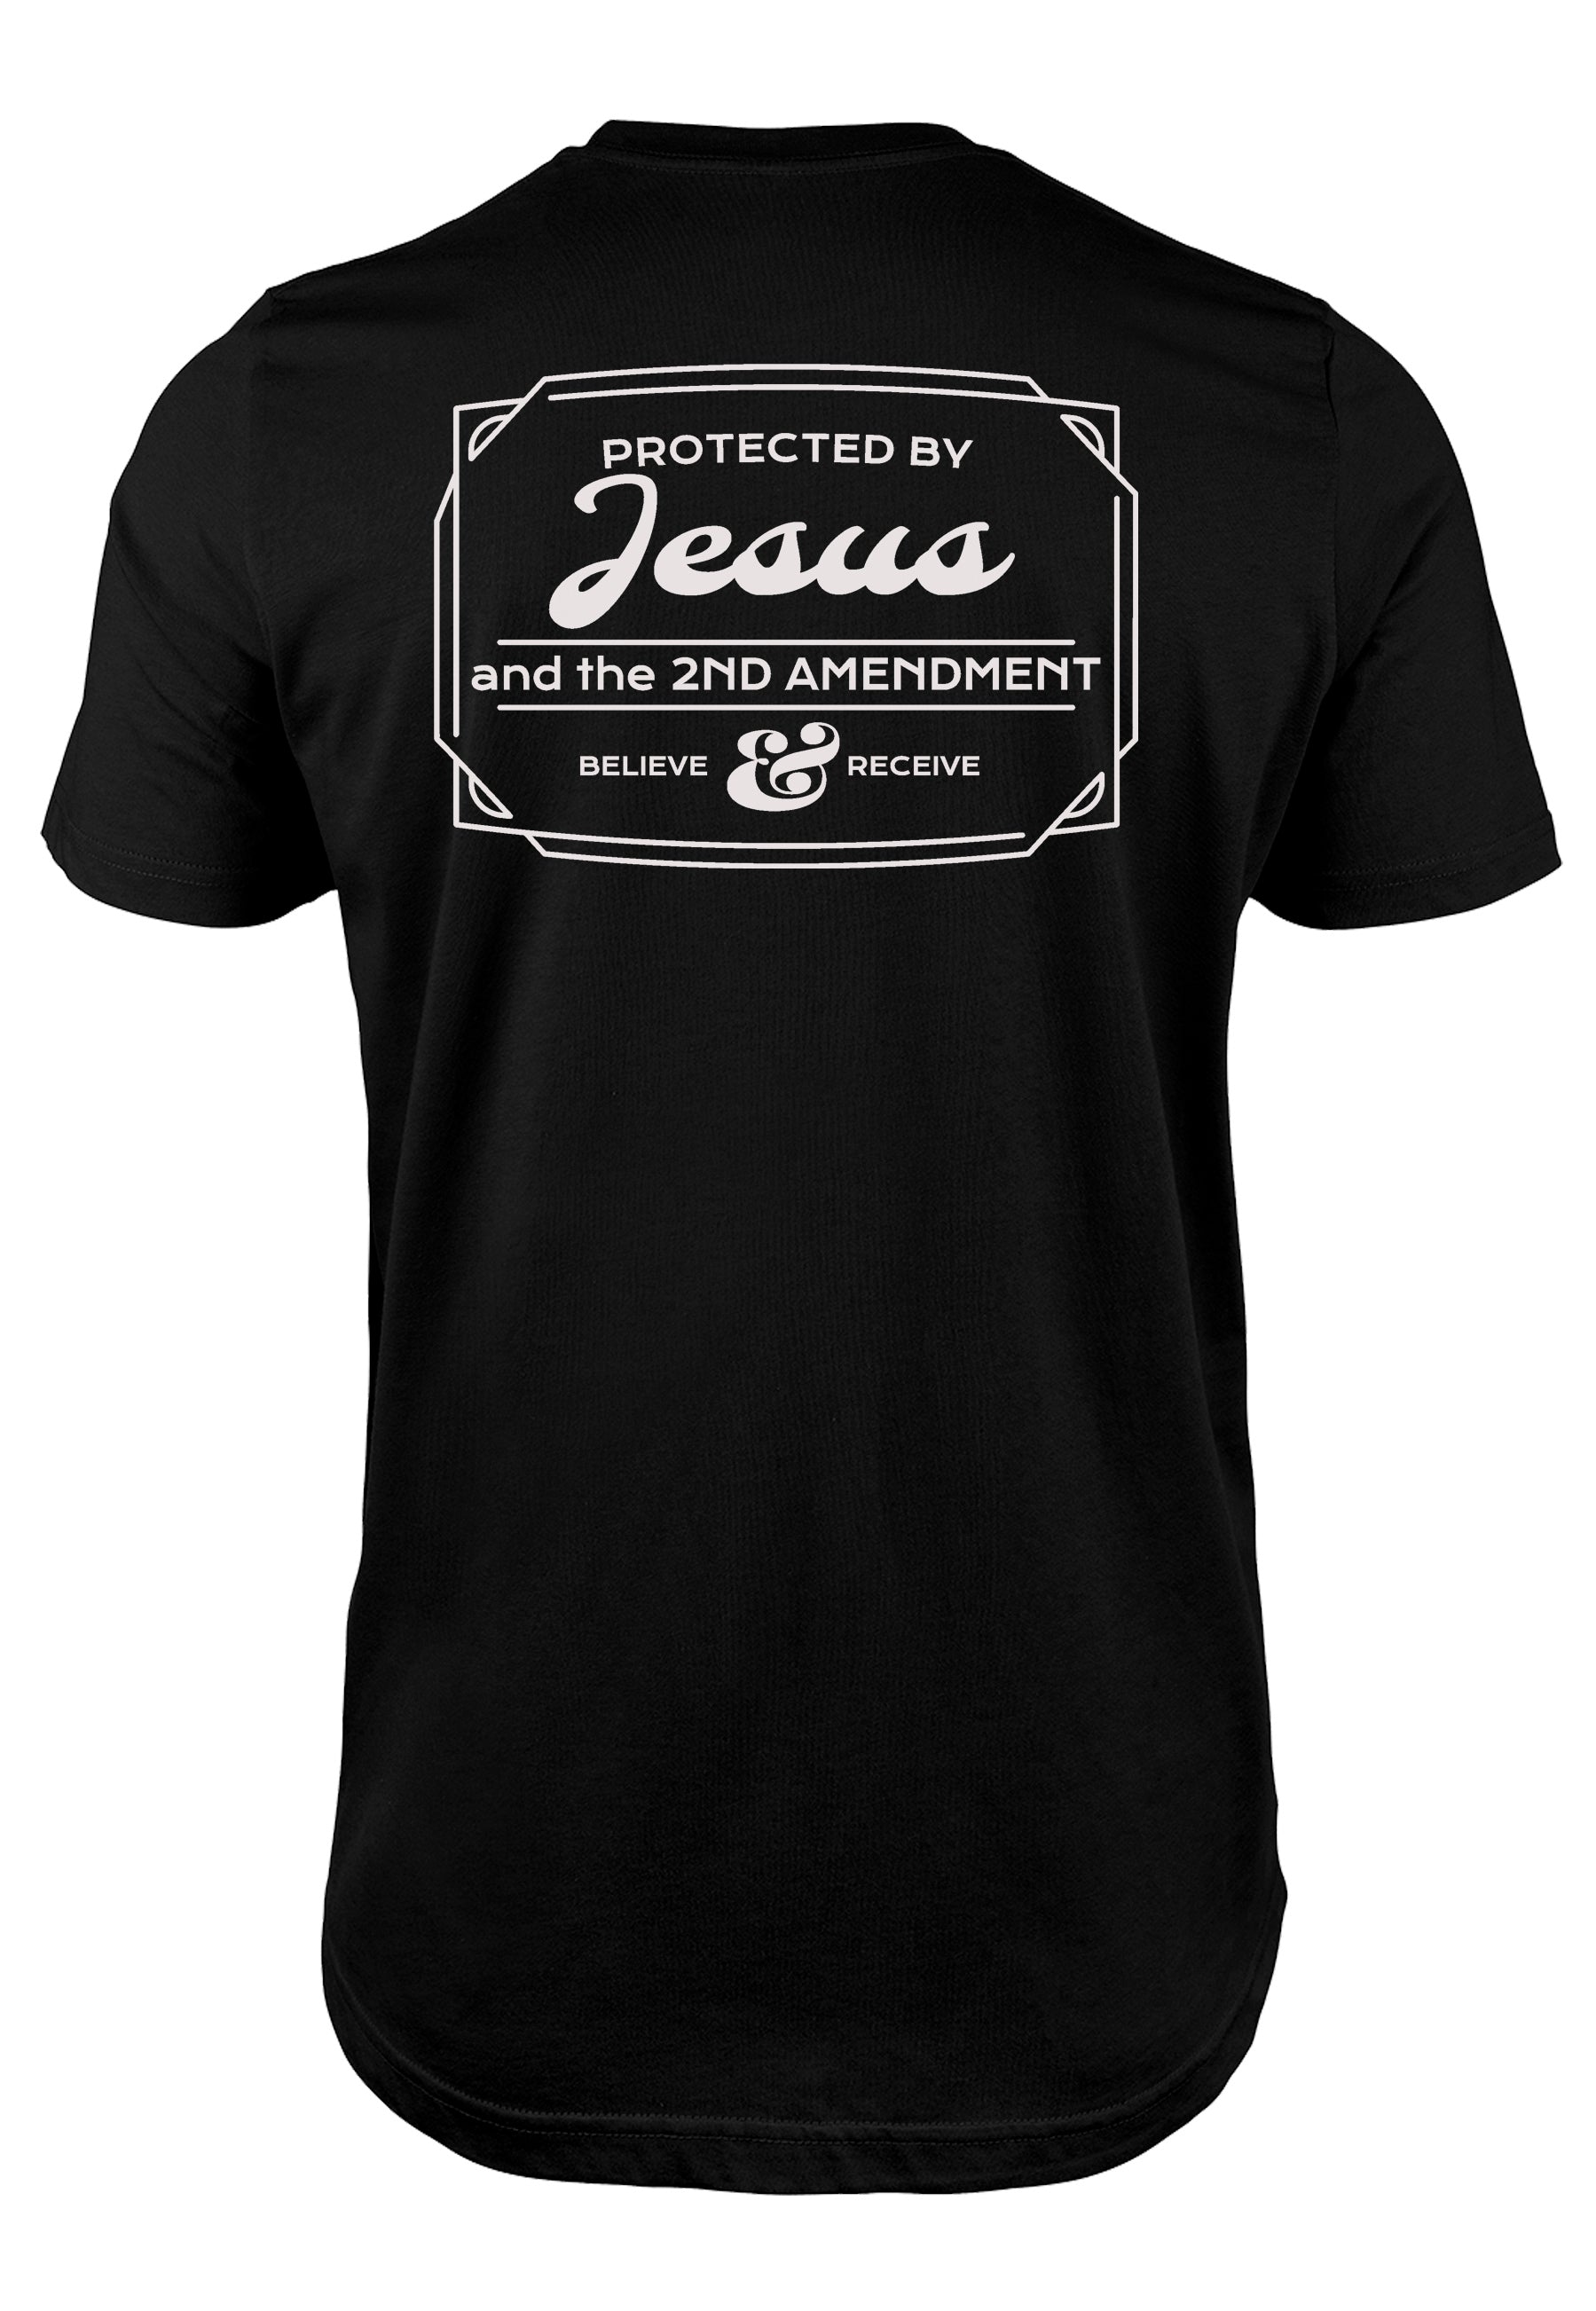 Protected by Jesus and the second amendment t-shirt